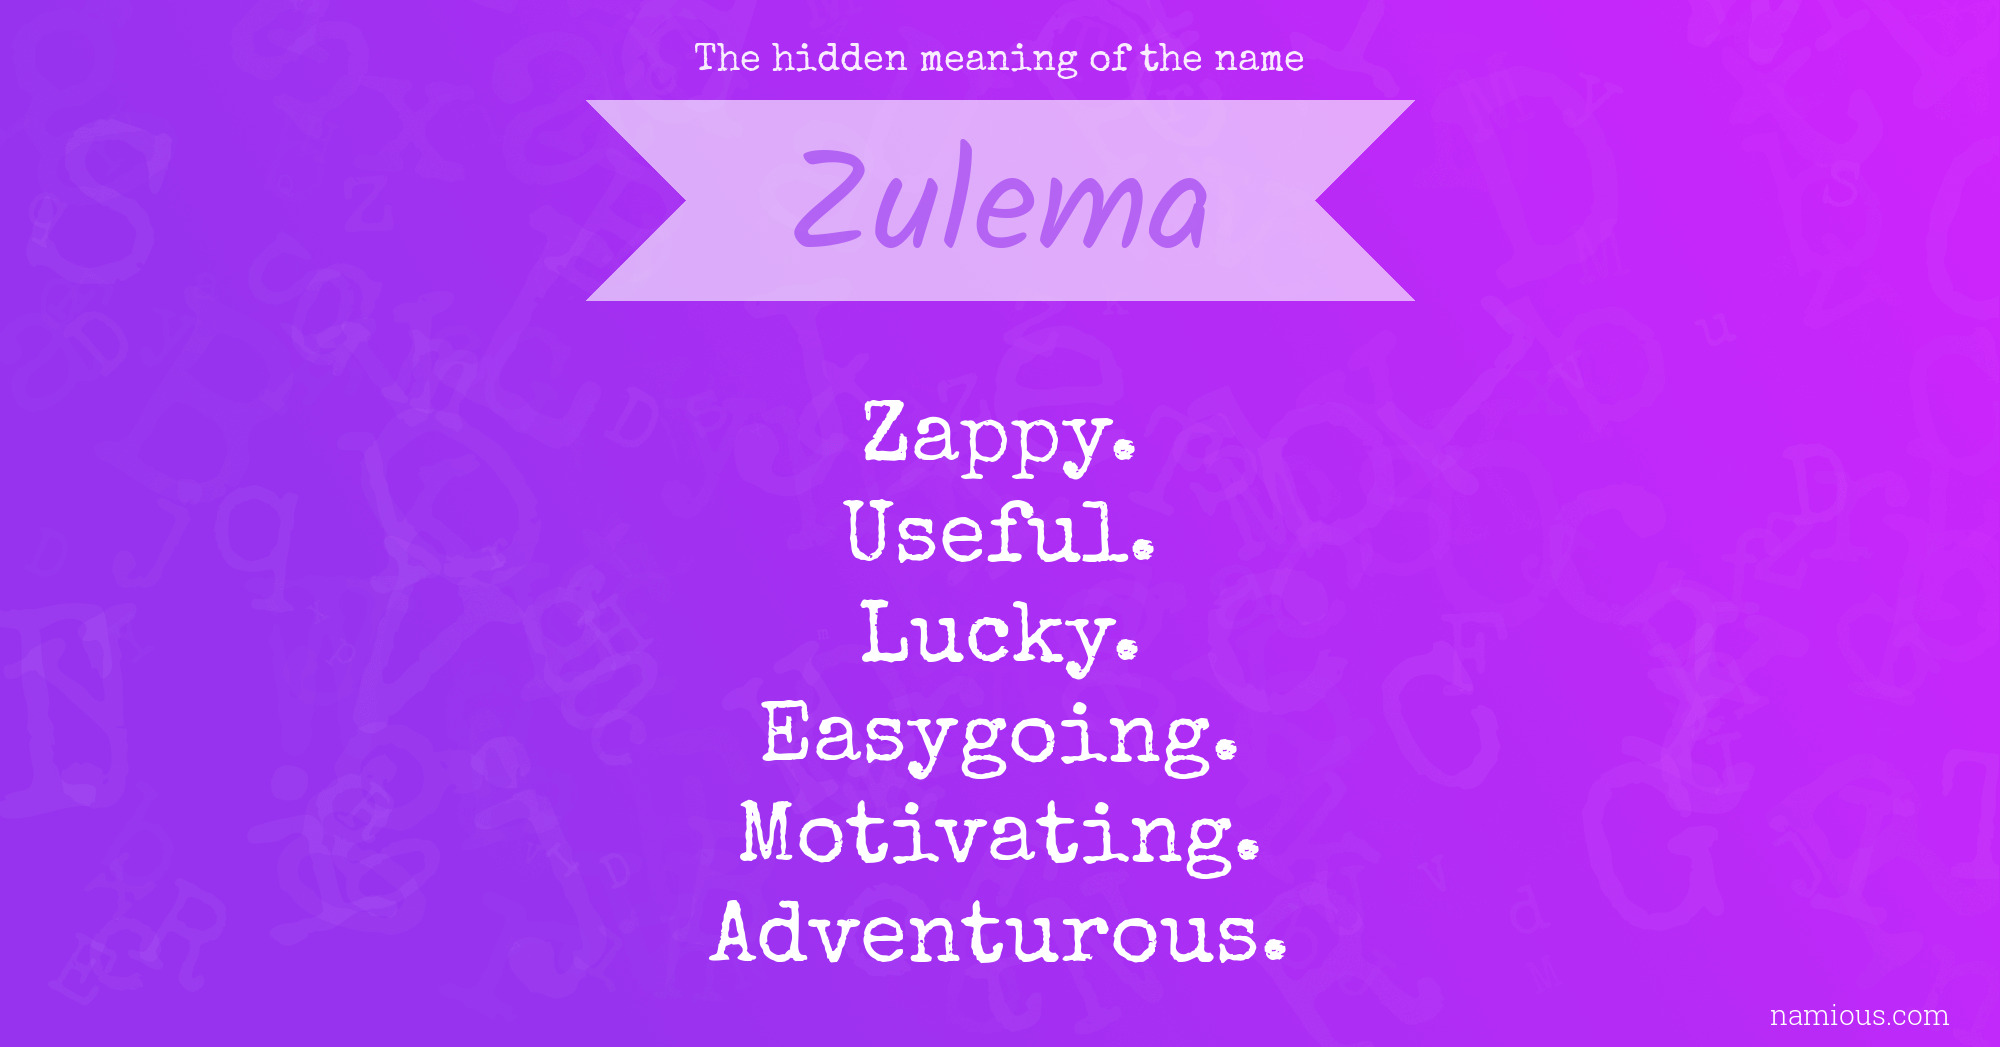 The hidden meaning of the name Zulema